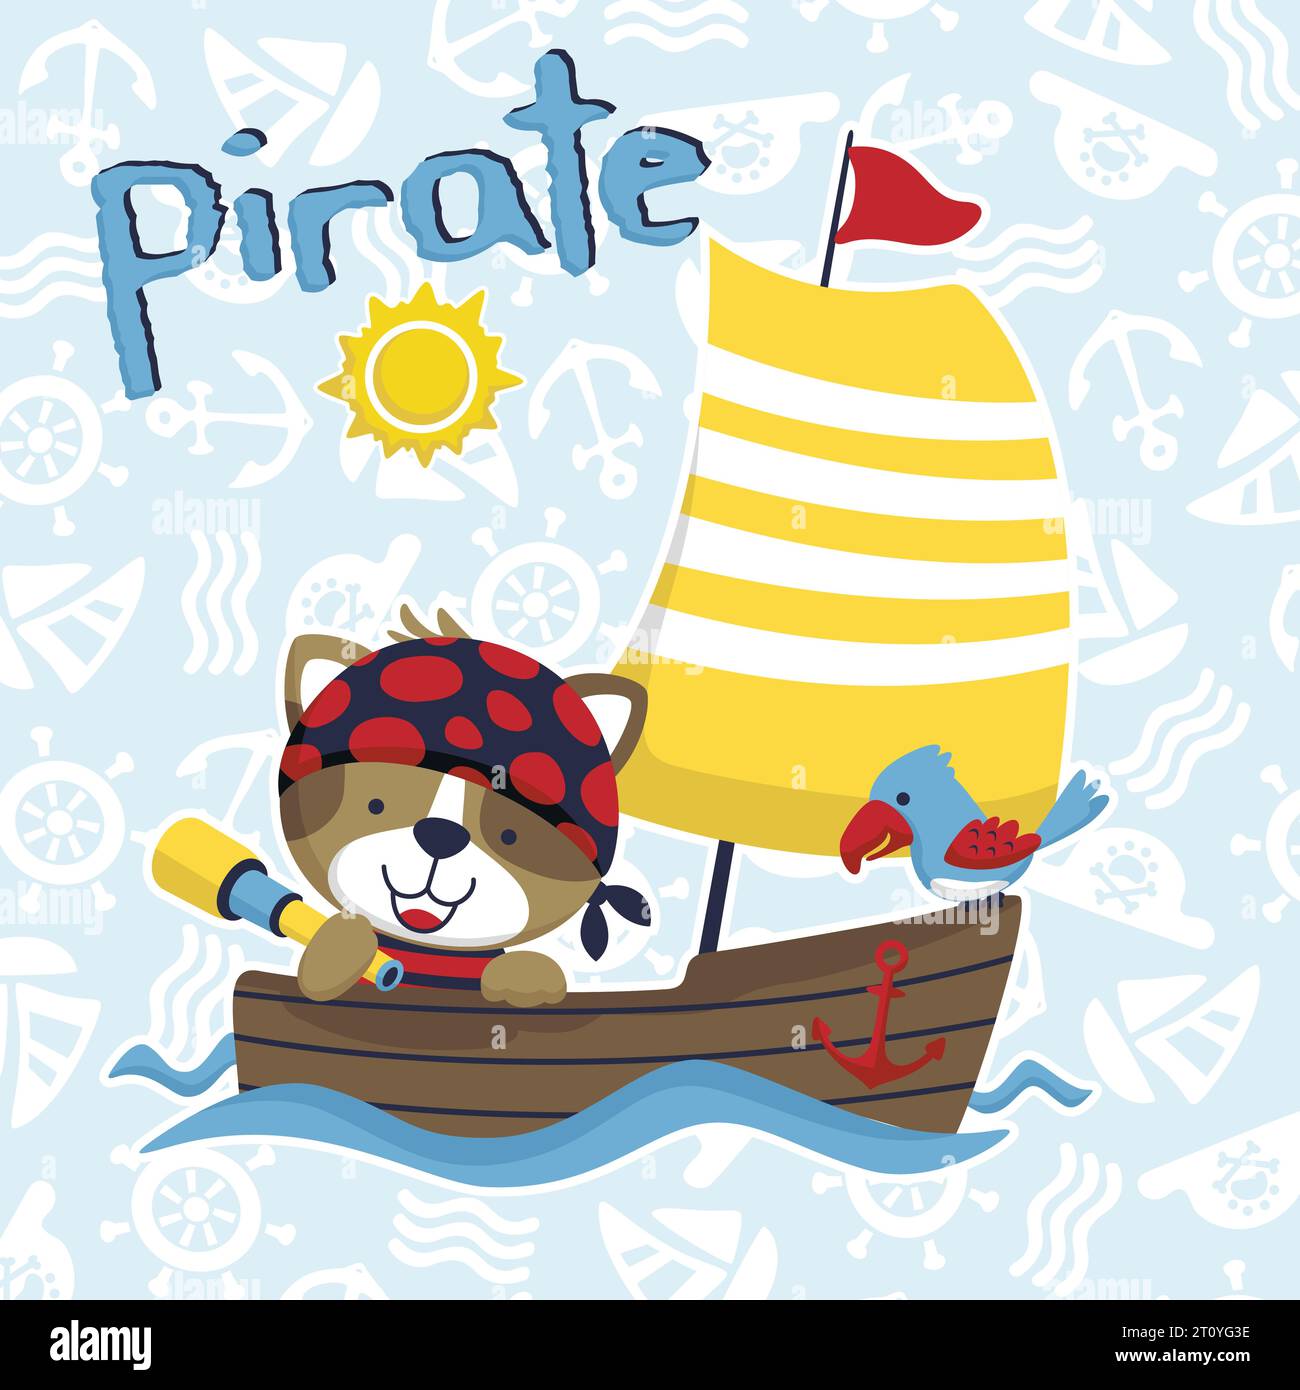 Vector illustration of cartoon cat in pirate costume with parrot on sailboat on sailing elements pattern background Stock Vector